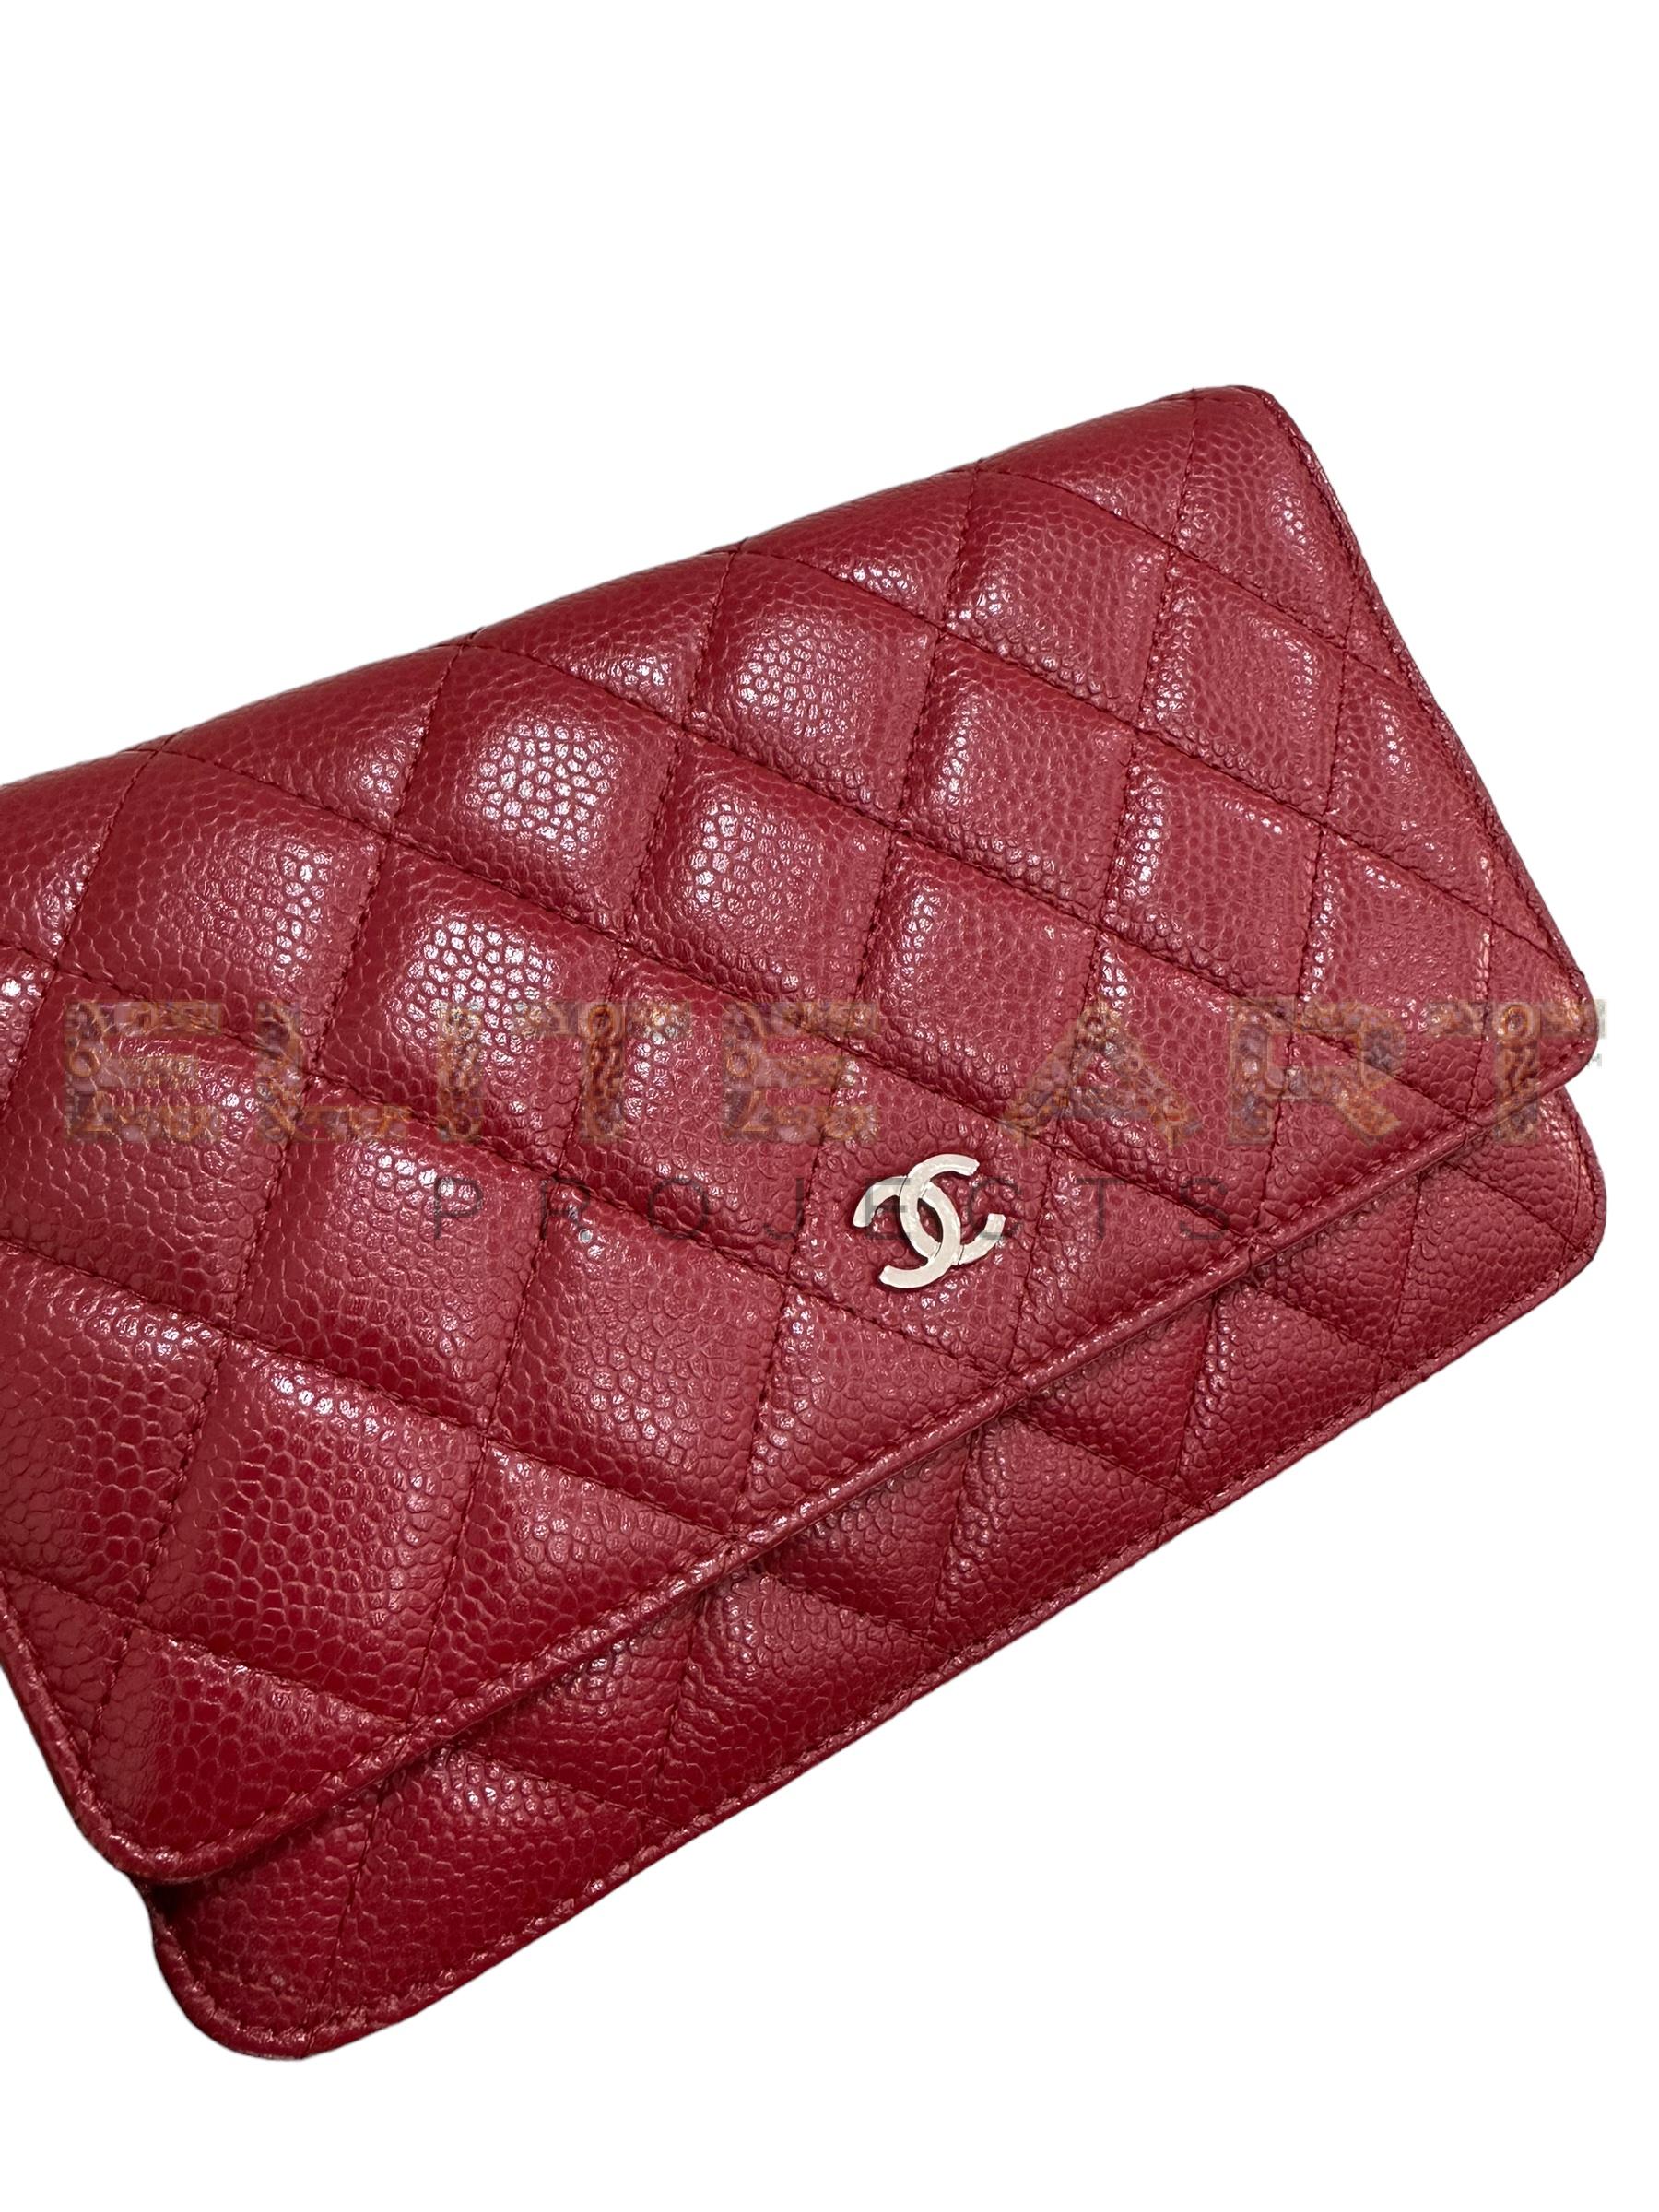 WOC, Wallet On Chain bag, red caviar leather, silver inserts, elegance